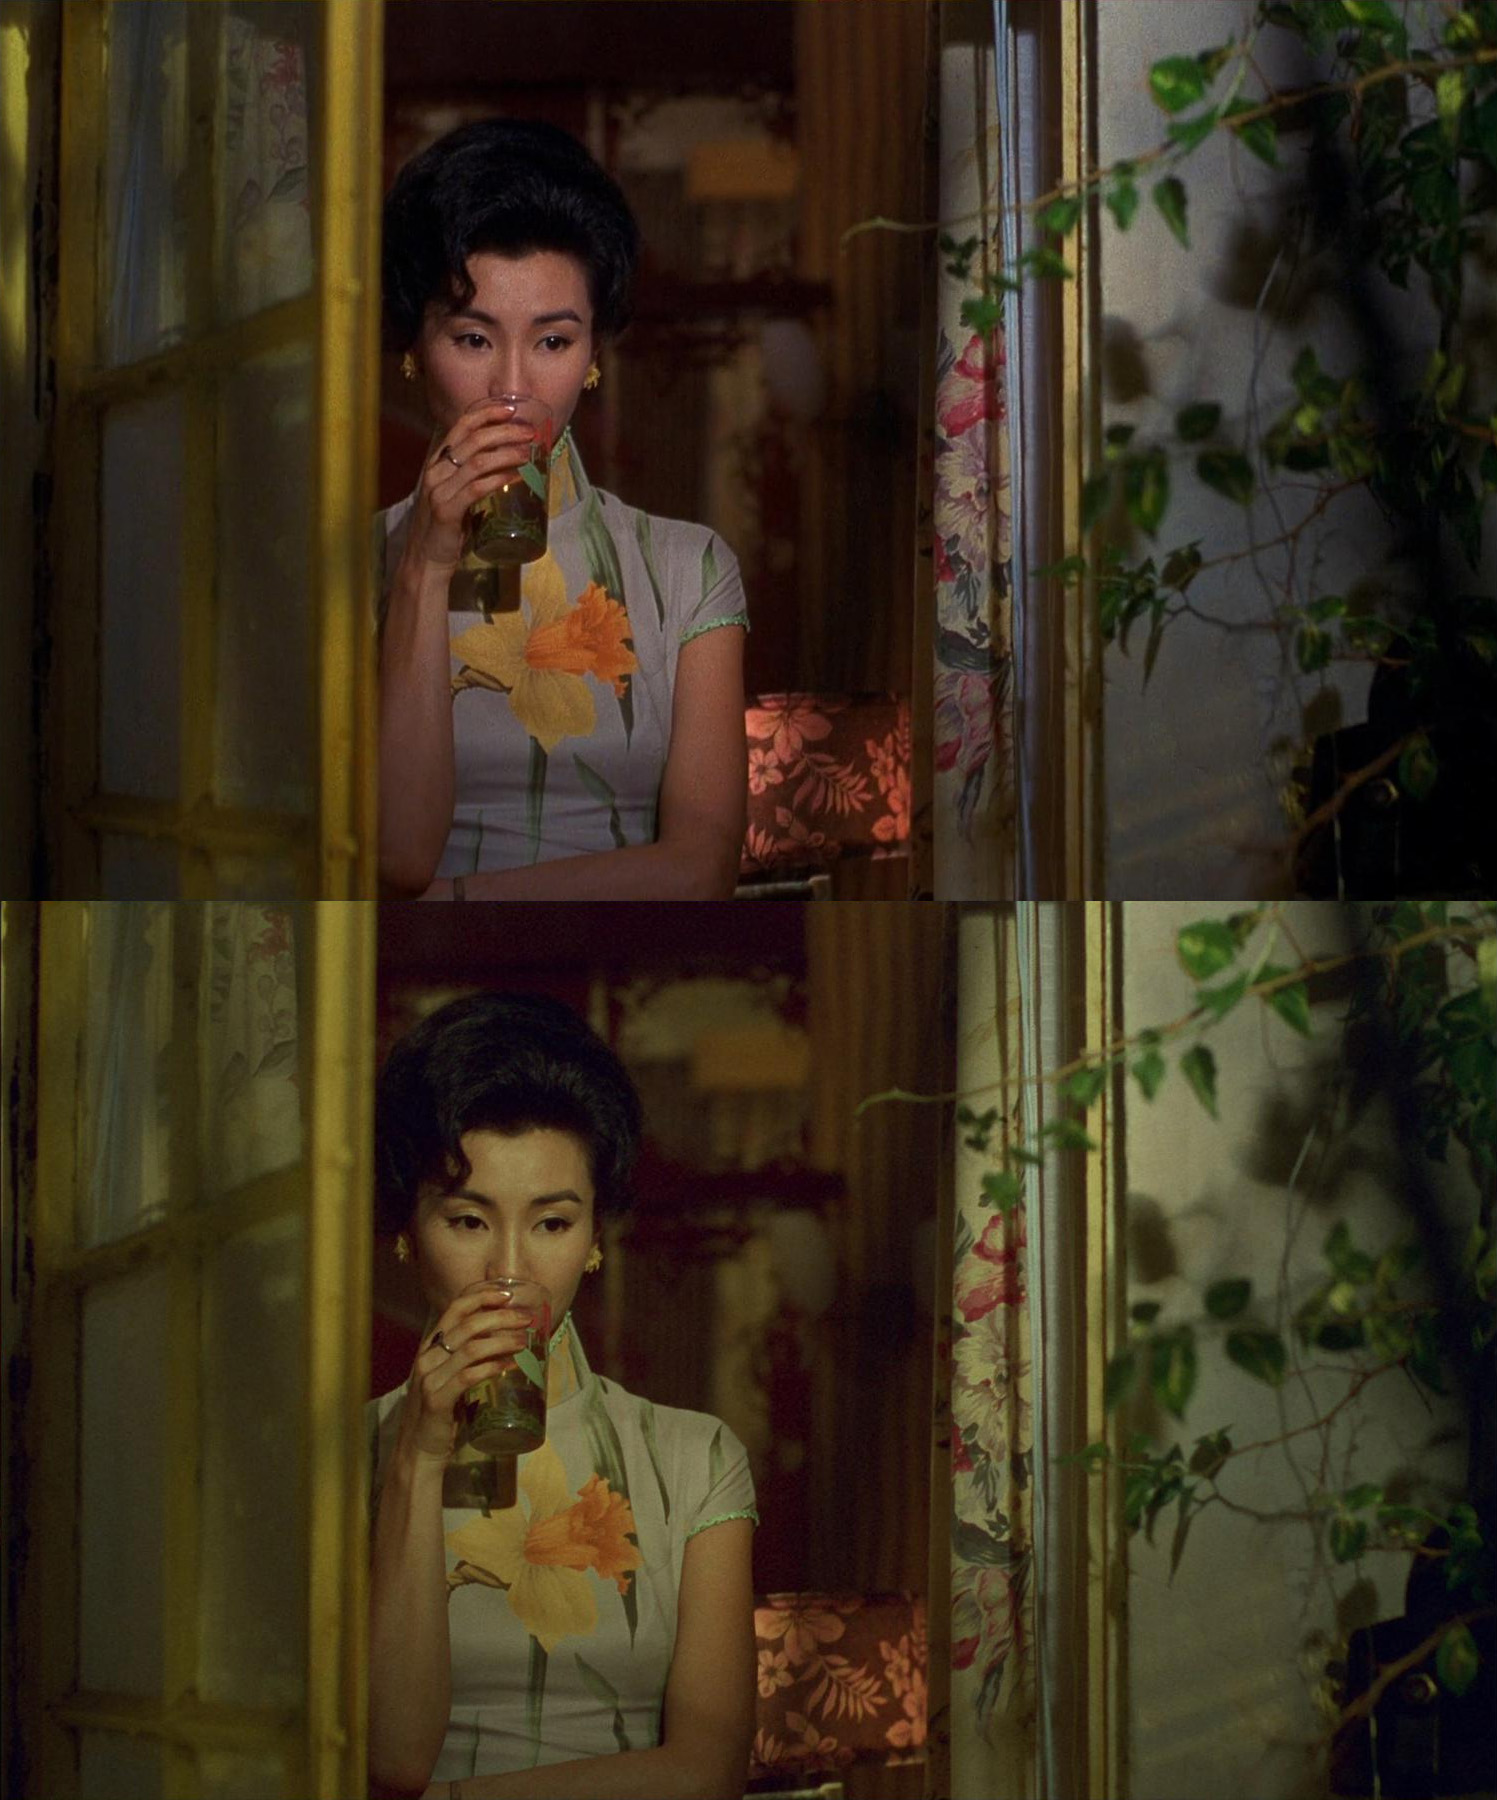 The original In the Mood for Love (top) offers a brighter, more saturated look than the remastered version. Images © Block 2 Pictures